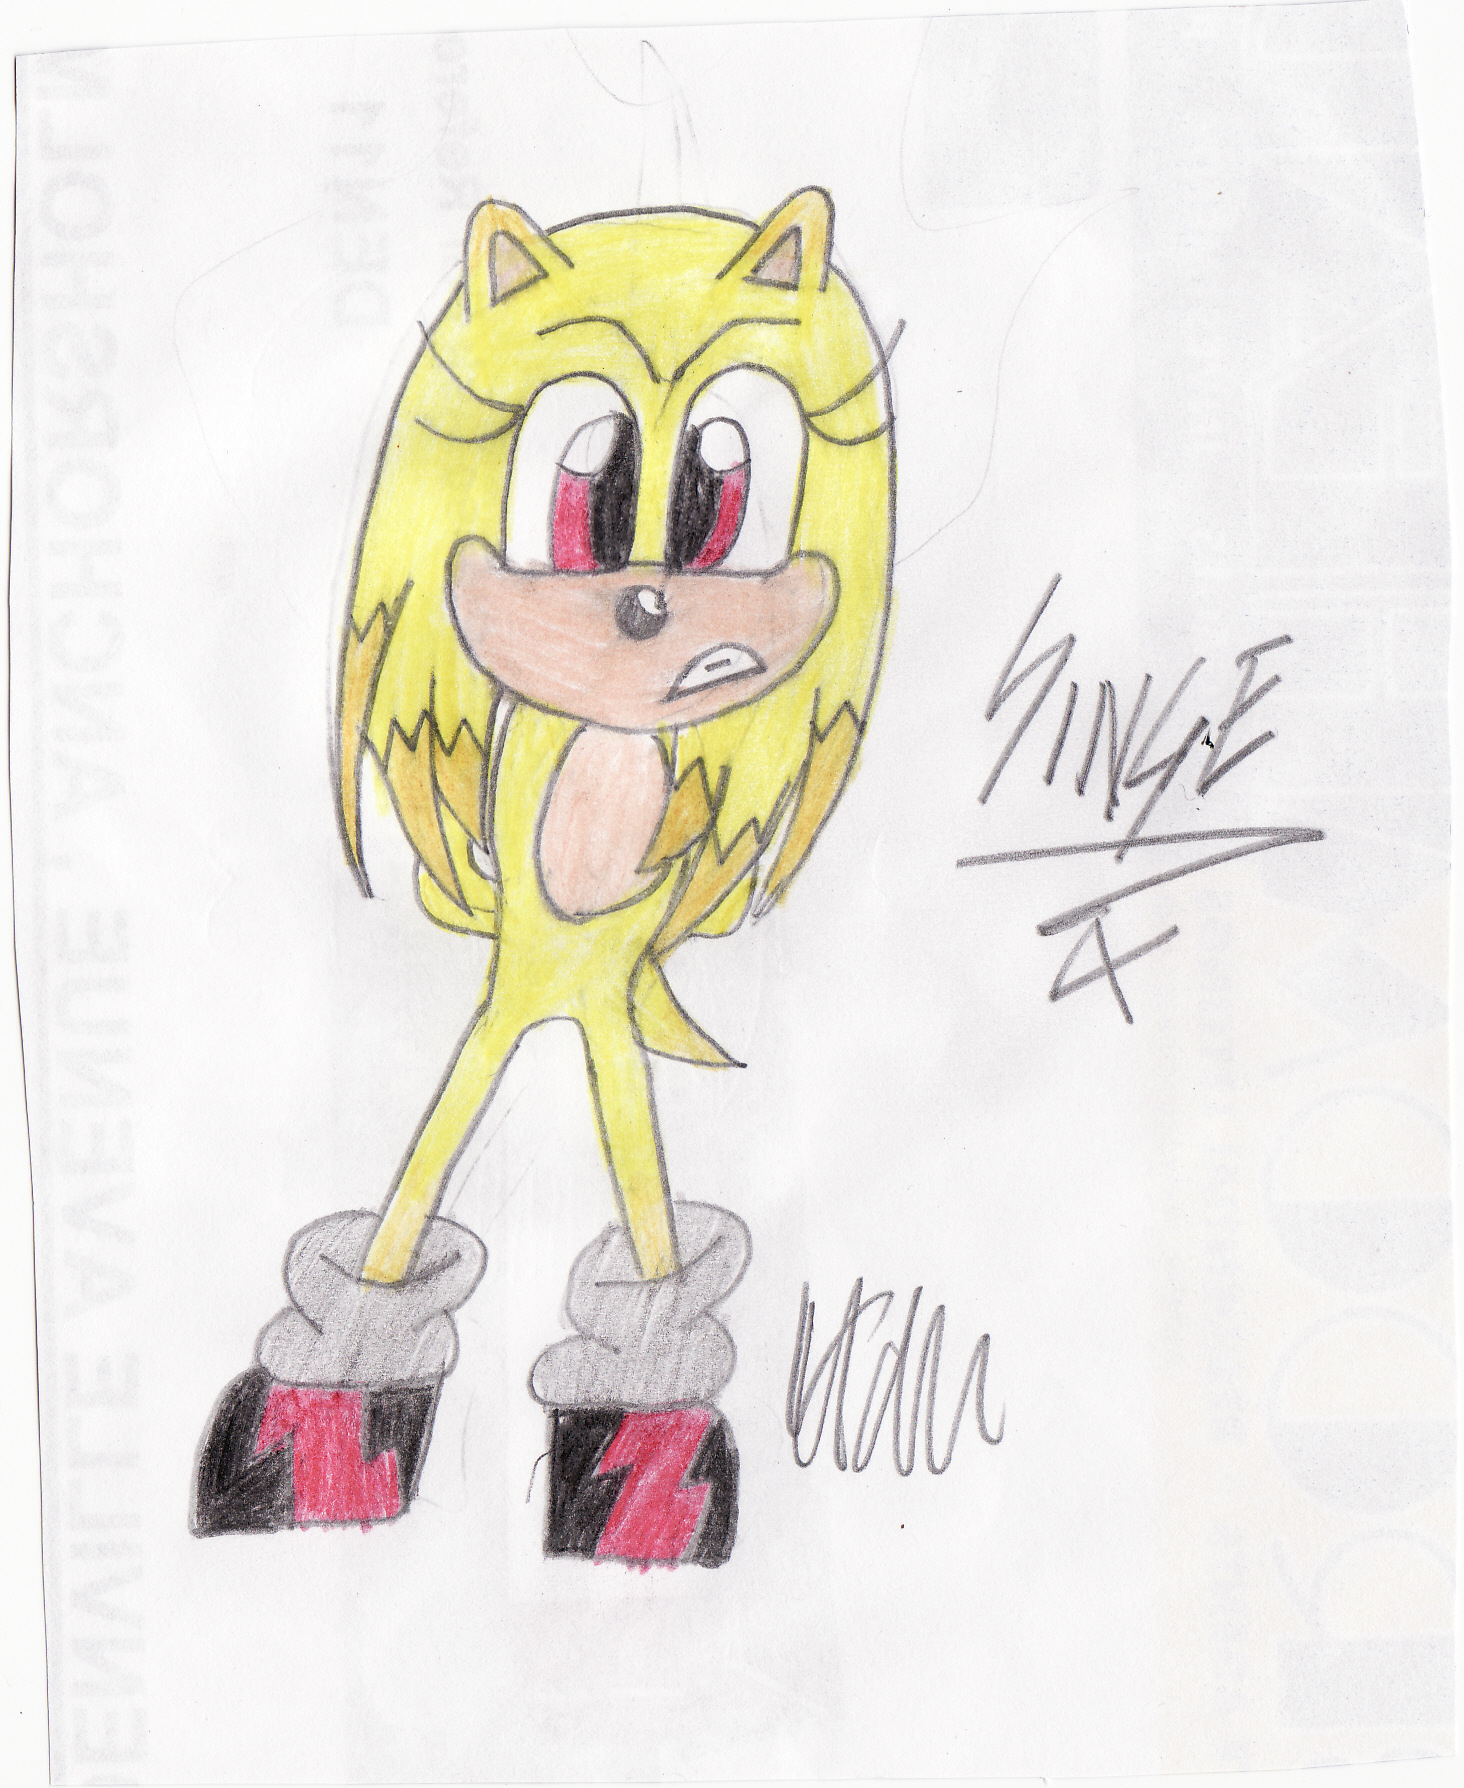 Singe The Hedgehog by BubblesHedgie